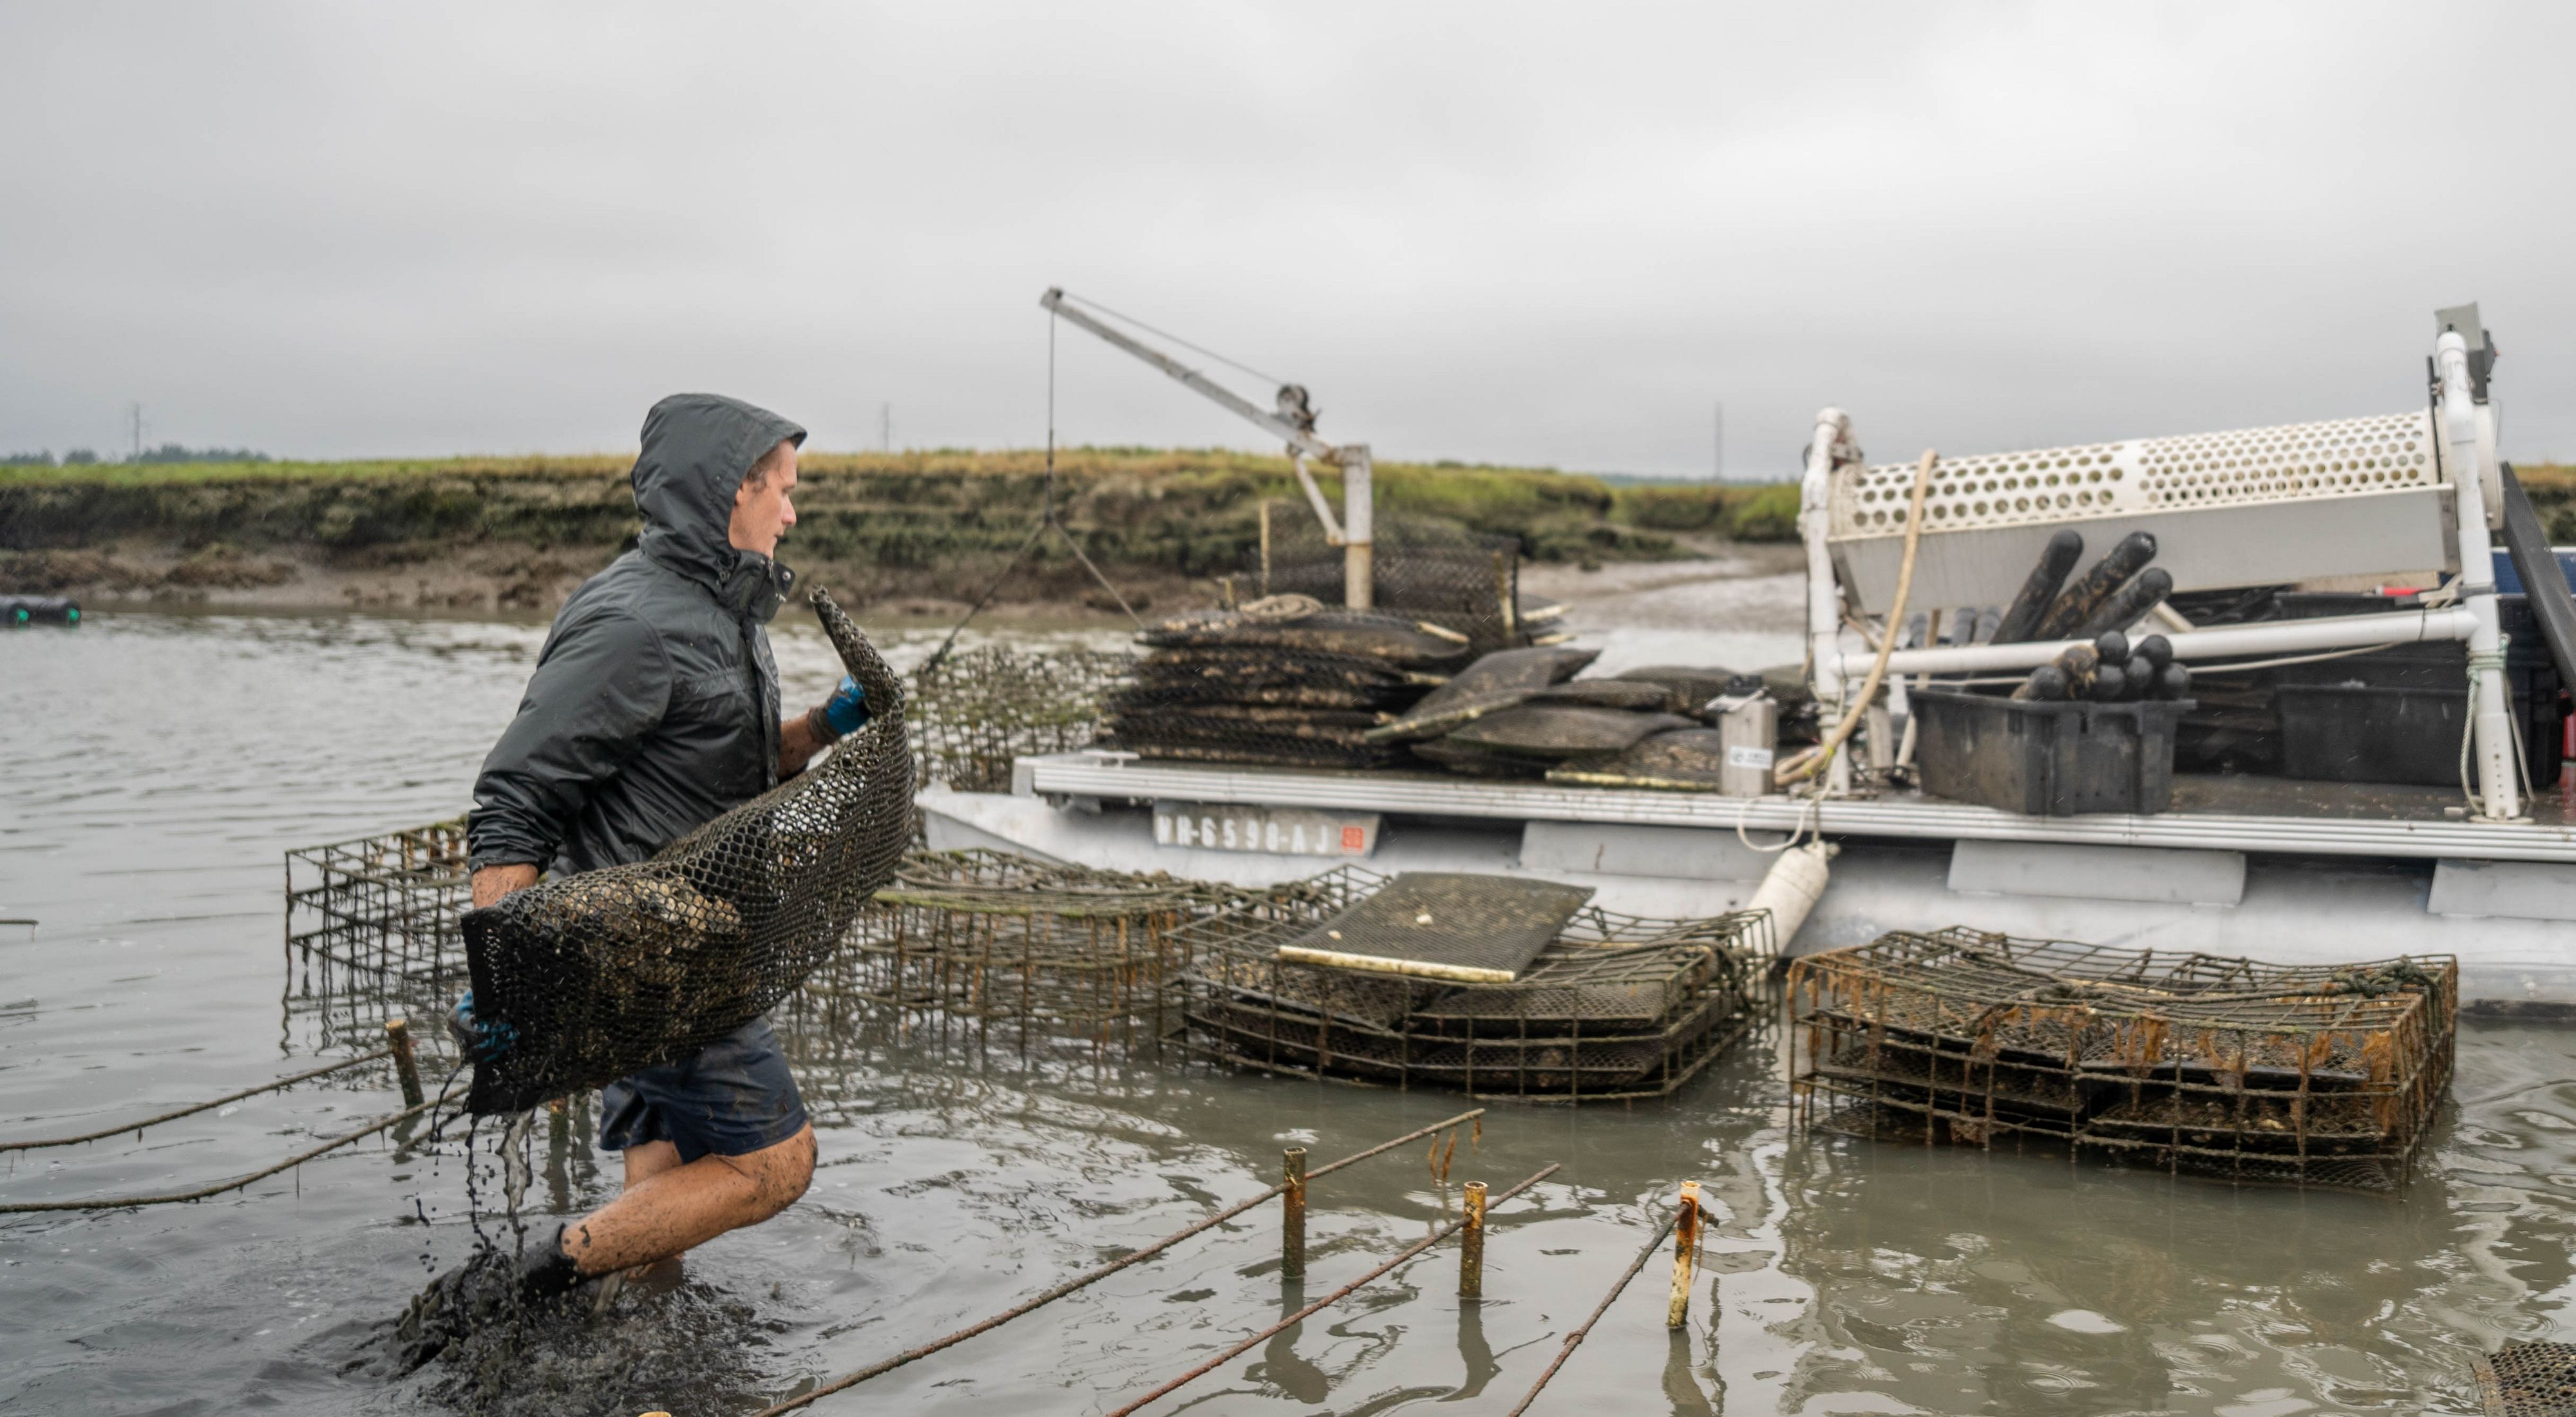 A farmer, wading through water, carries a bag of oysters.